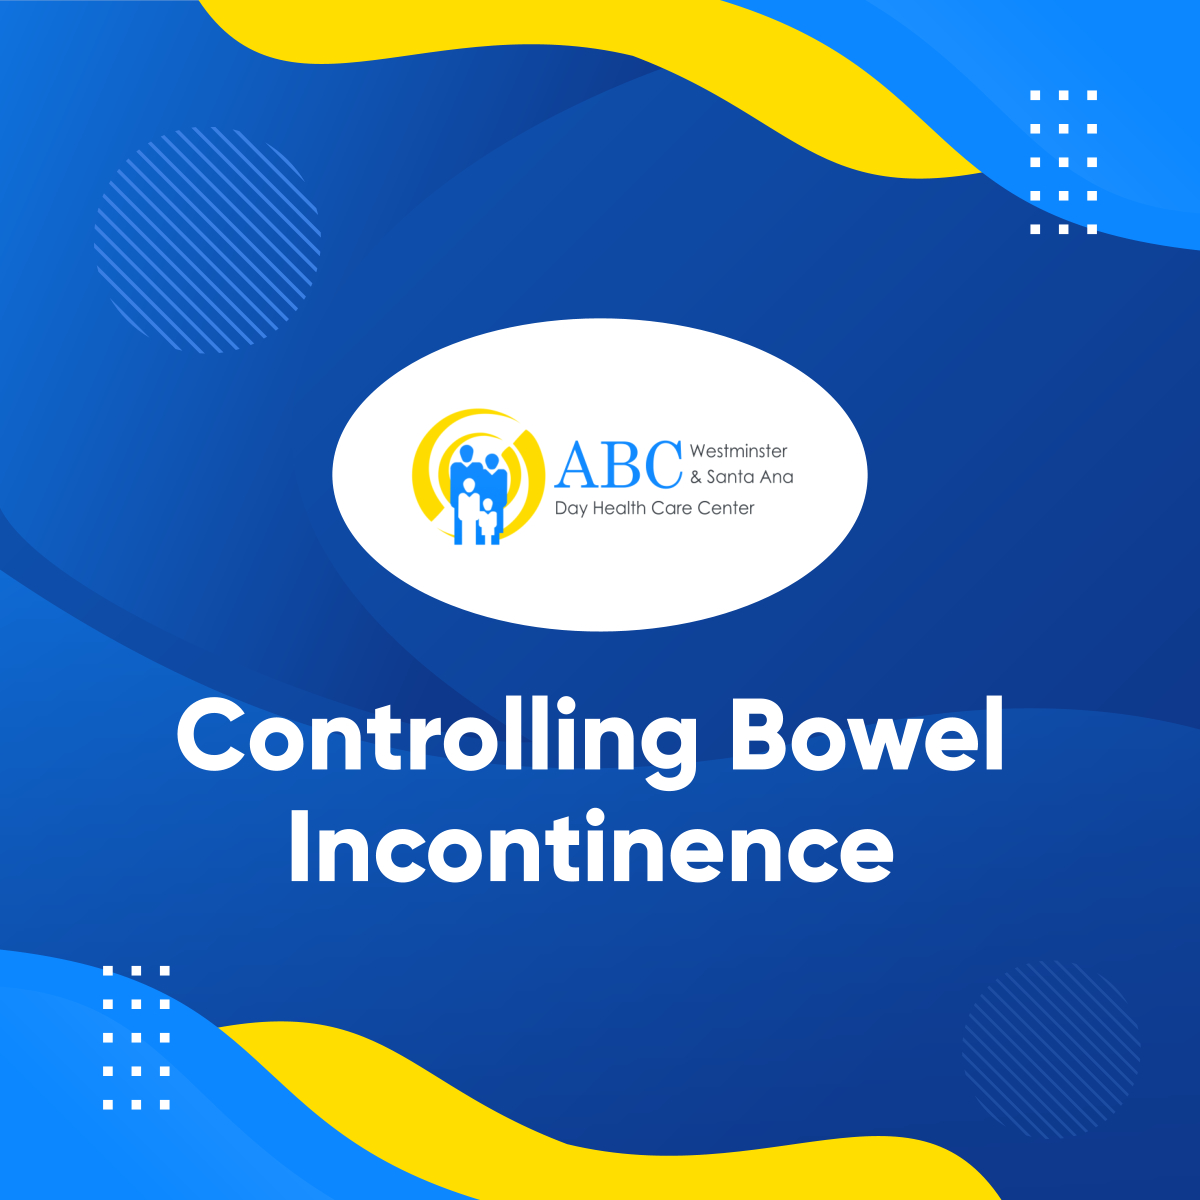 Take advantage of your ortho reflex upon waking up and after every meal. After urinating, sit in the toilet bowl for 5 minutes with your feet on a stool. It will activate your body’s bowel movement and help with incontinence.

#BowelIncontinence #WestminsterCA #AdultDayServices